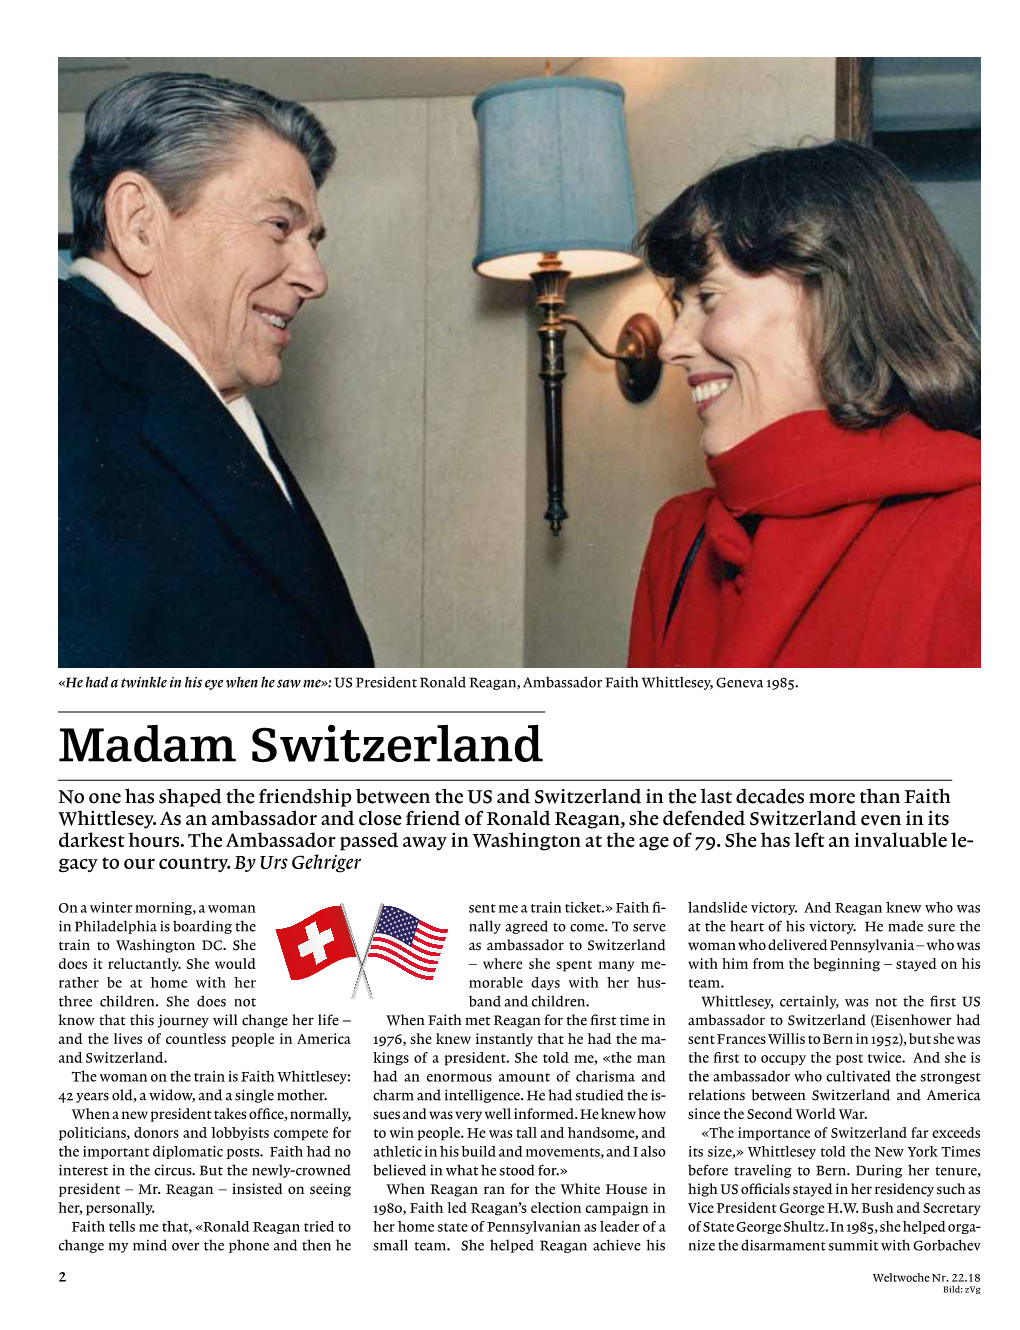 Madam Switzerland No One Has Shaped the Friendship Between the US and Switzerland in the Last Decades More Than Faith Whittlesey